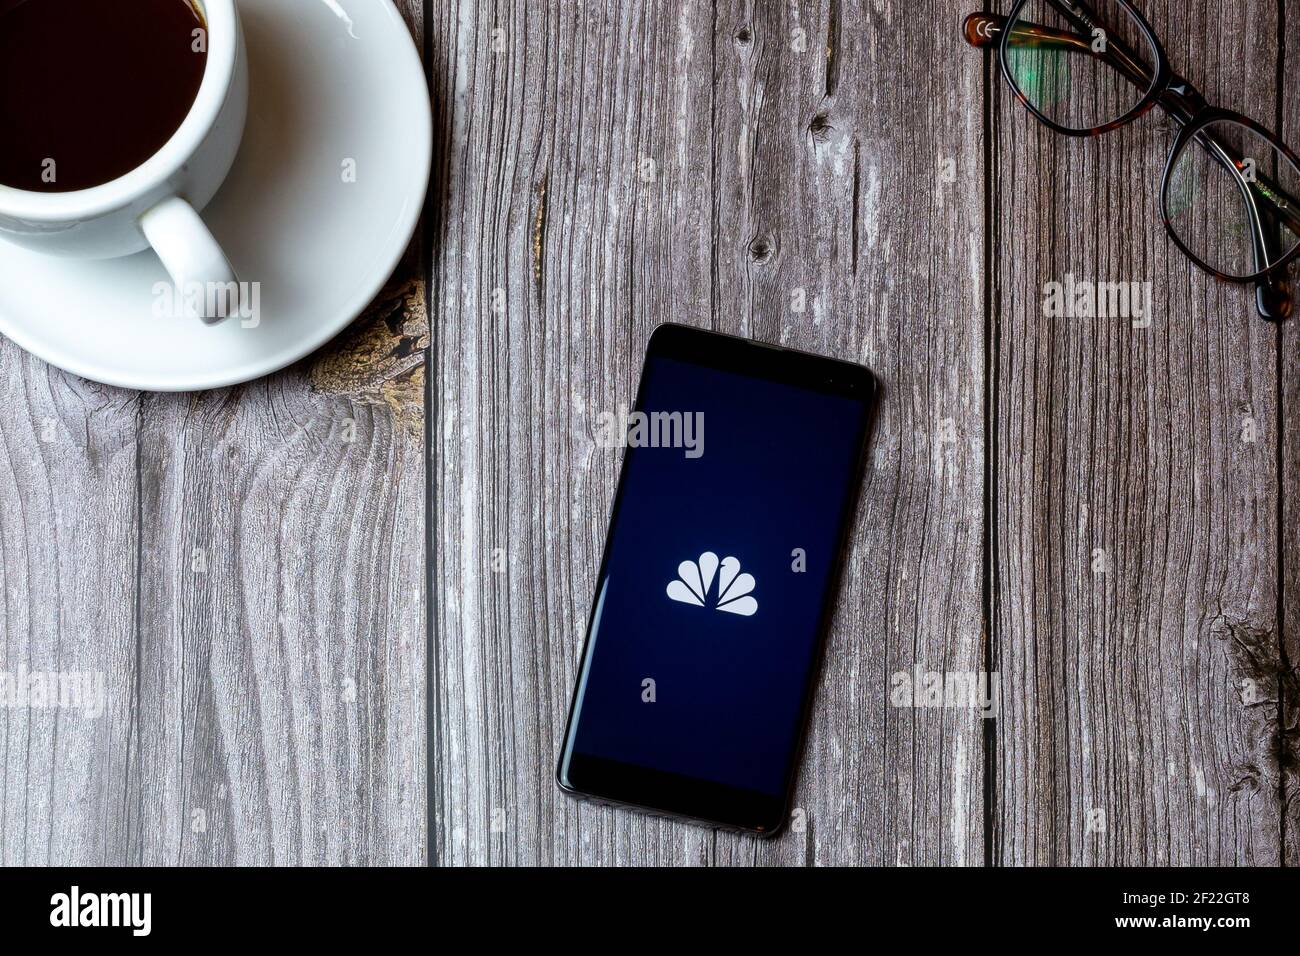 A mobile phone or cell phone laid on a wooden table with the NBC News app open on screen next to a coffee Stock Photo